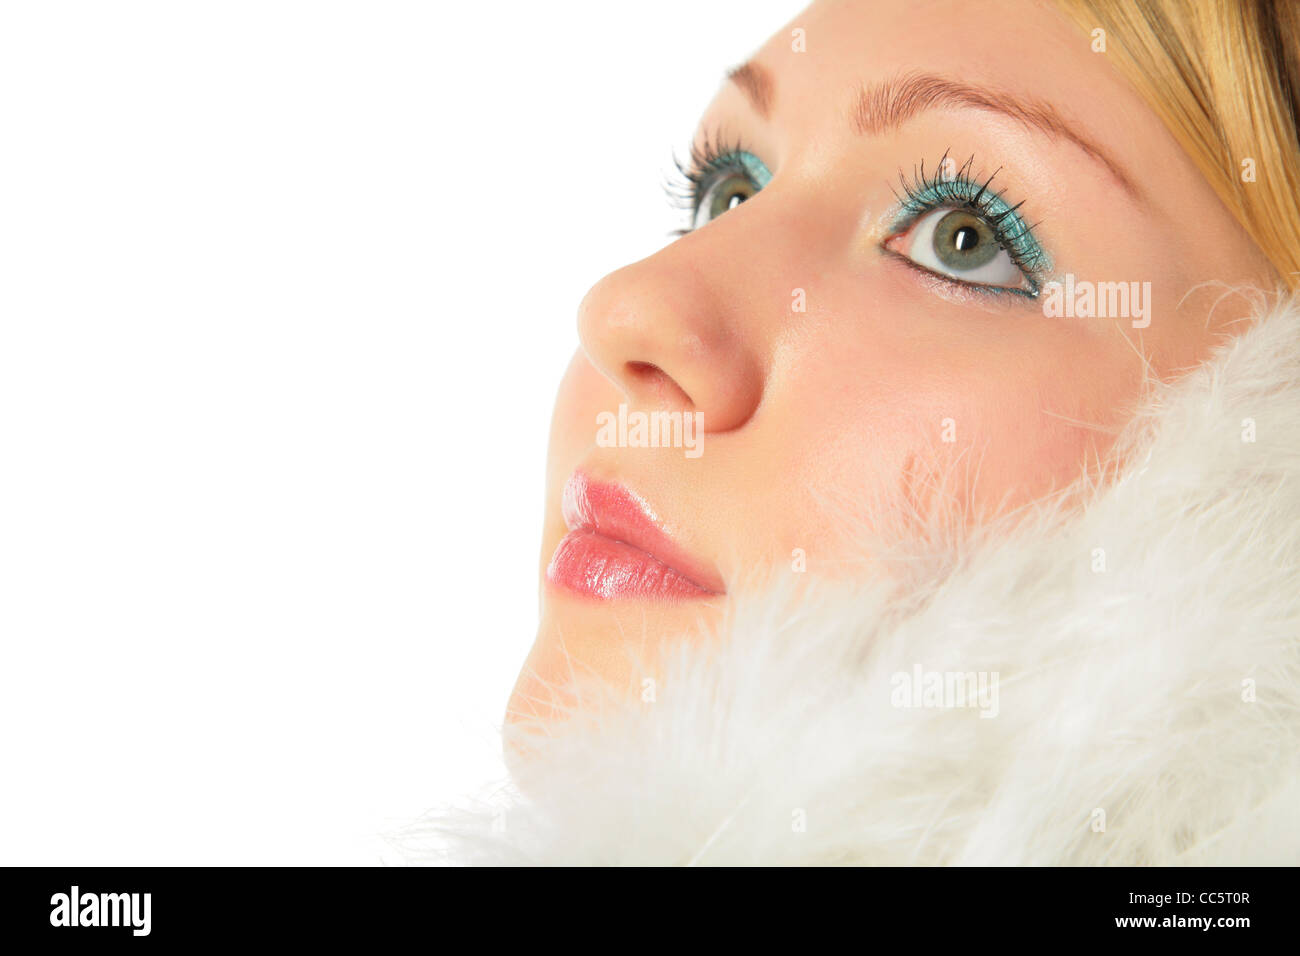 Close-up portrait of blonde girl in angel's costume Stock Photo